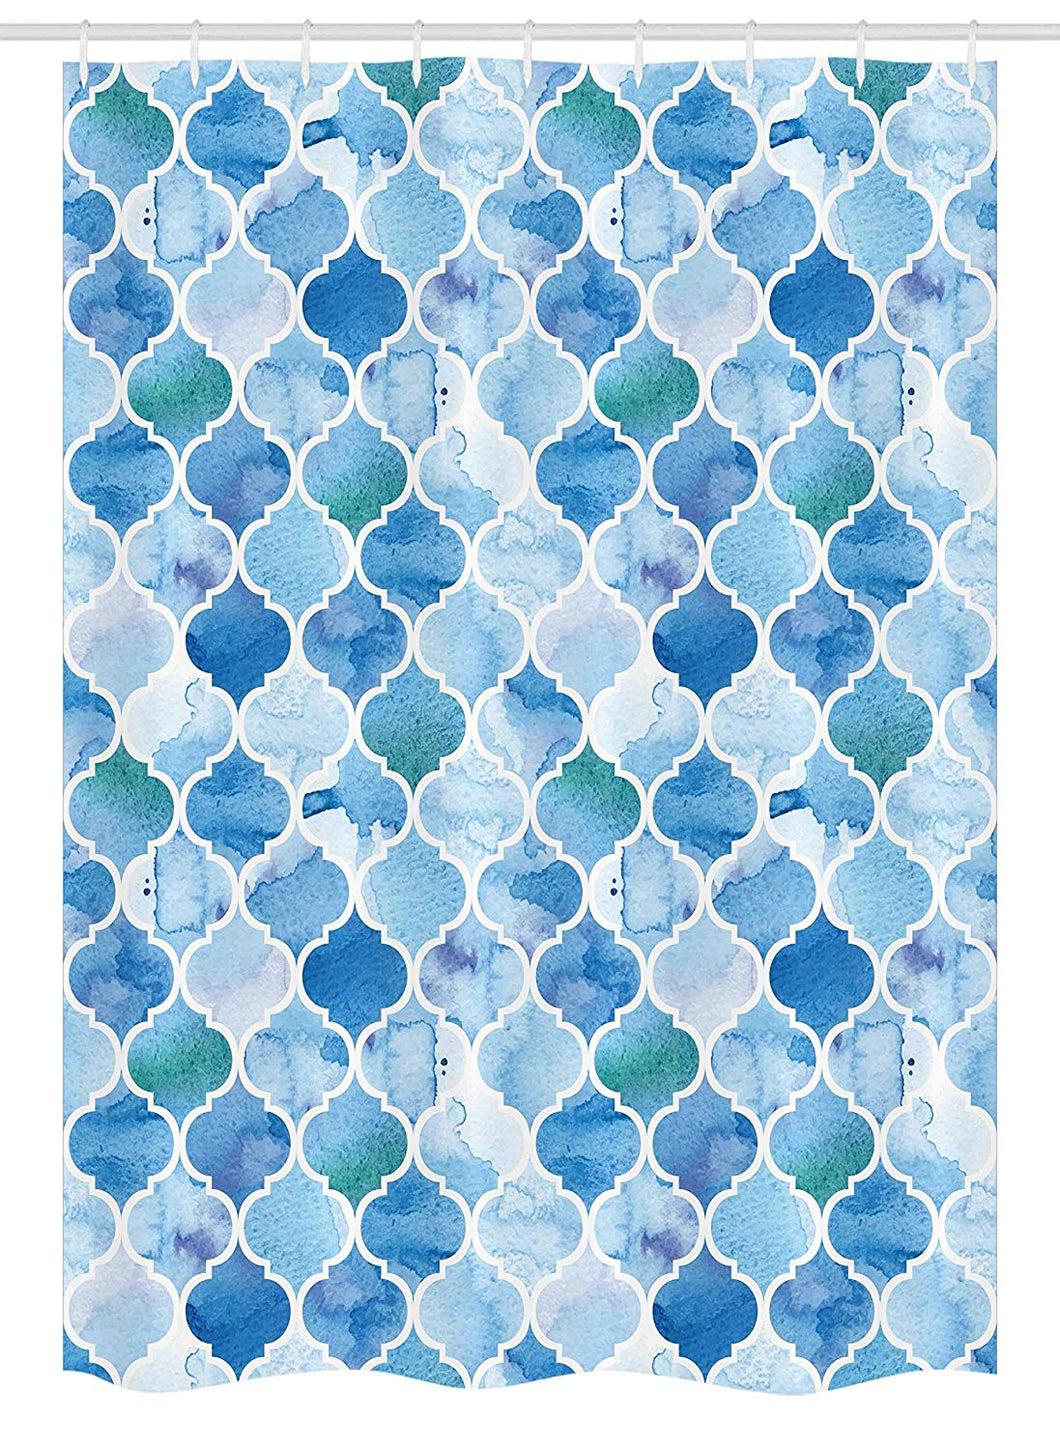 Ambesonne Moroccan Stall Shower Curtain, Oriental Style Arabic Mosaic Pattern in Watercolor Paint Retro Style Artwork Print, Fabric Bathroom Decor Set with Hooks, 54 W x 78 L Inches, Light Blue